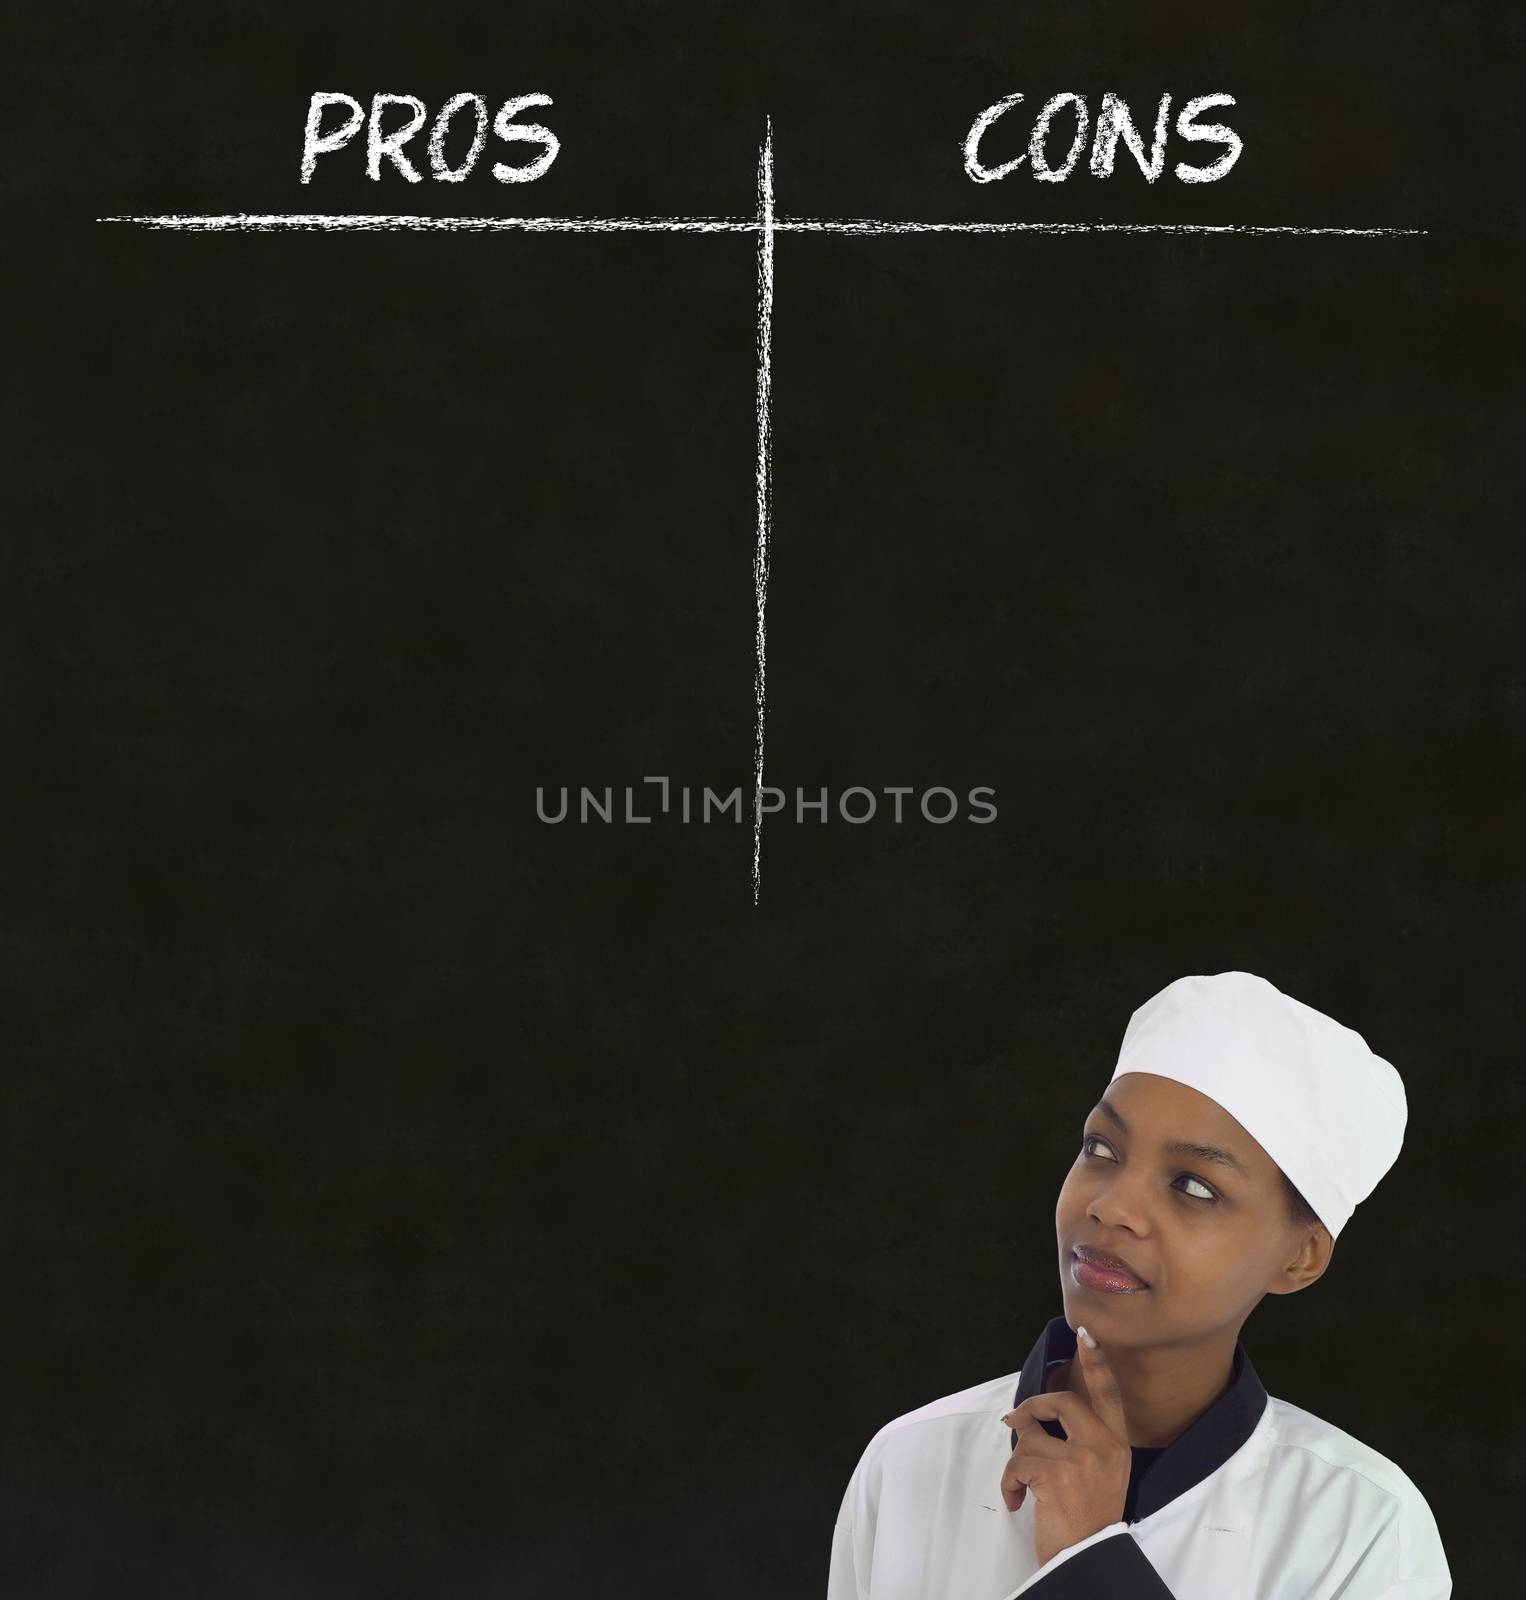 African American woman chef thinking with chalk pros and cons on blackboard background